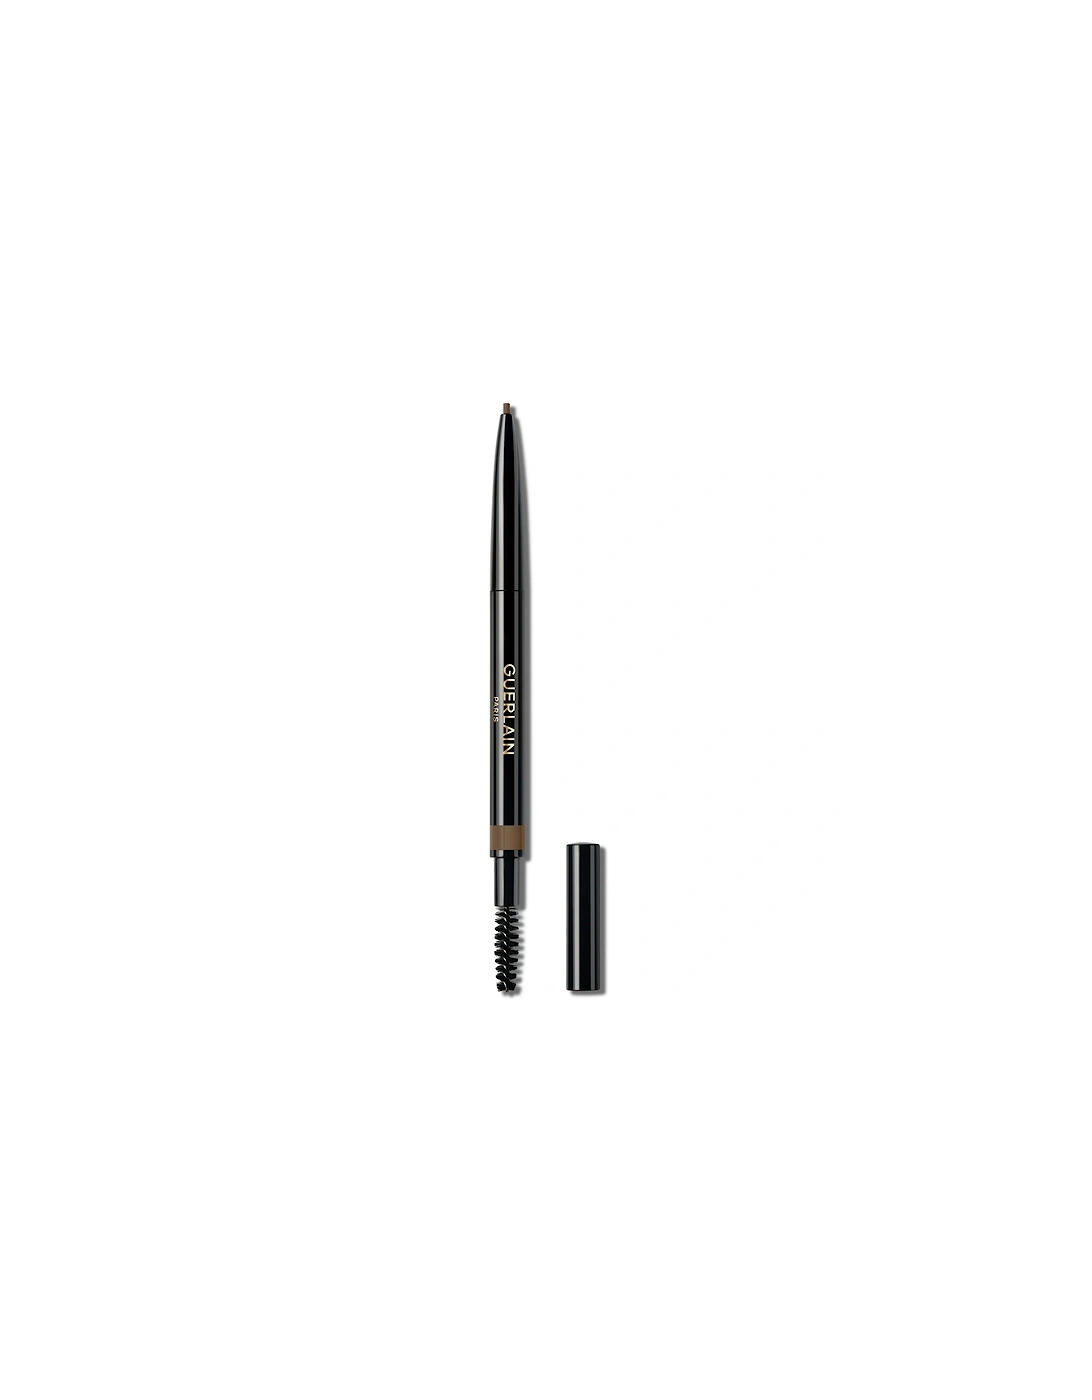 Brow G High Precision and Long Wear Brow Pencil - 03 Medium Brown, 2 of 1